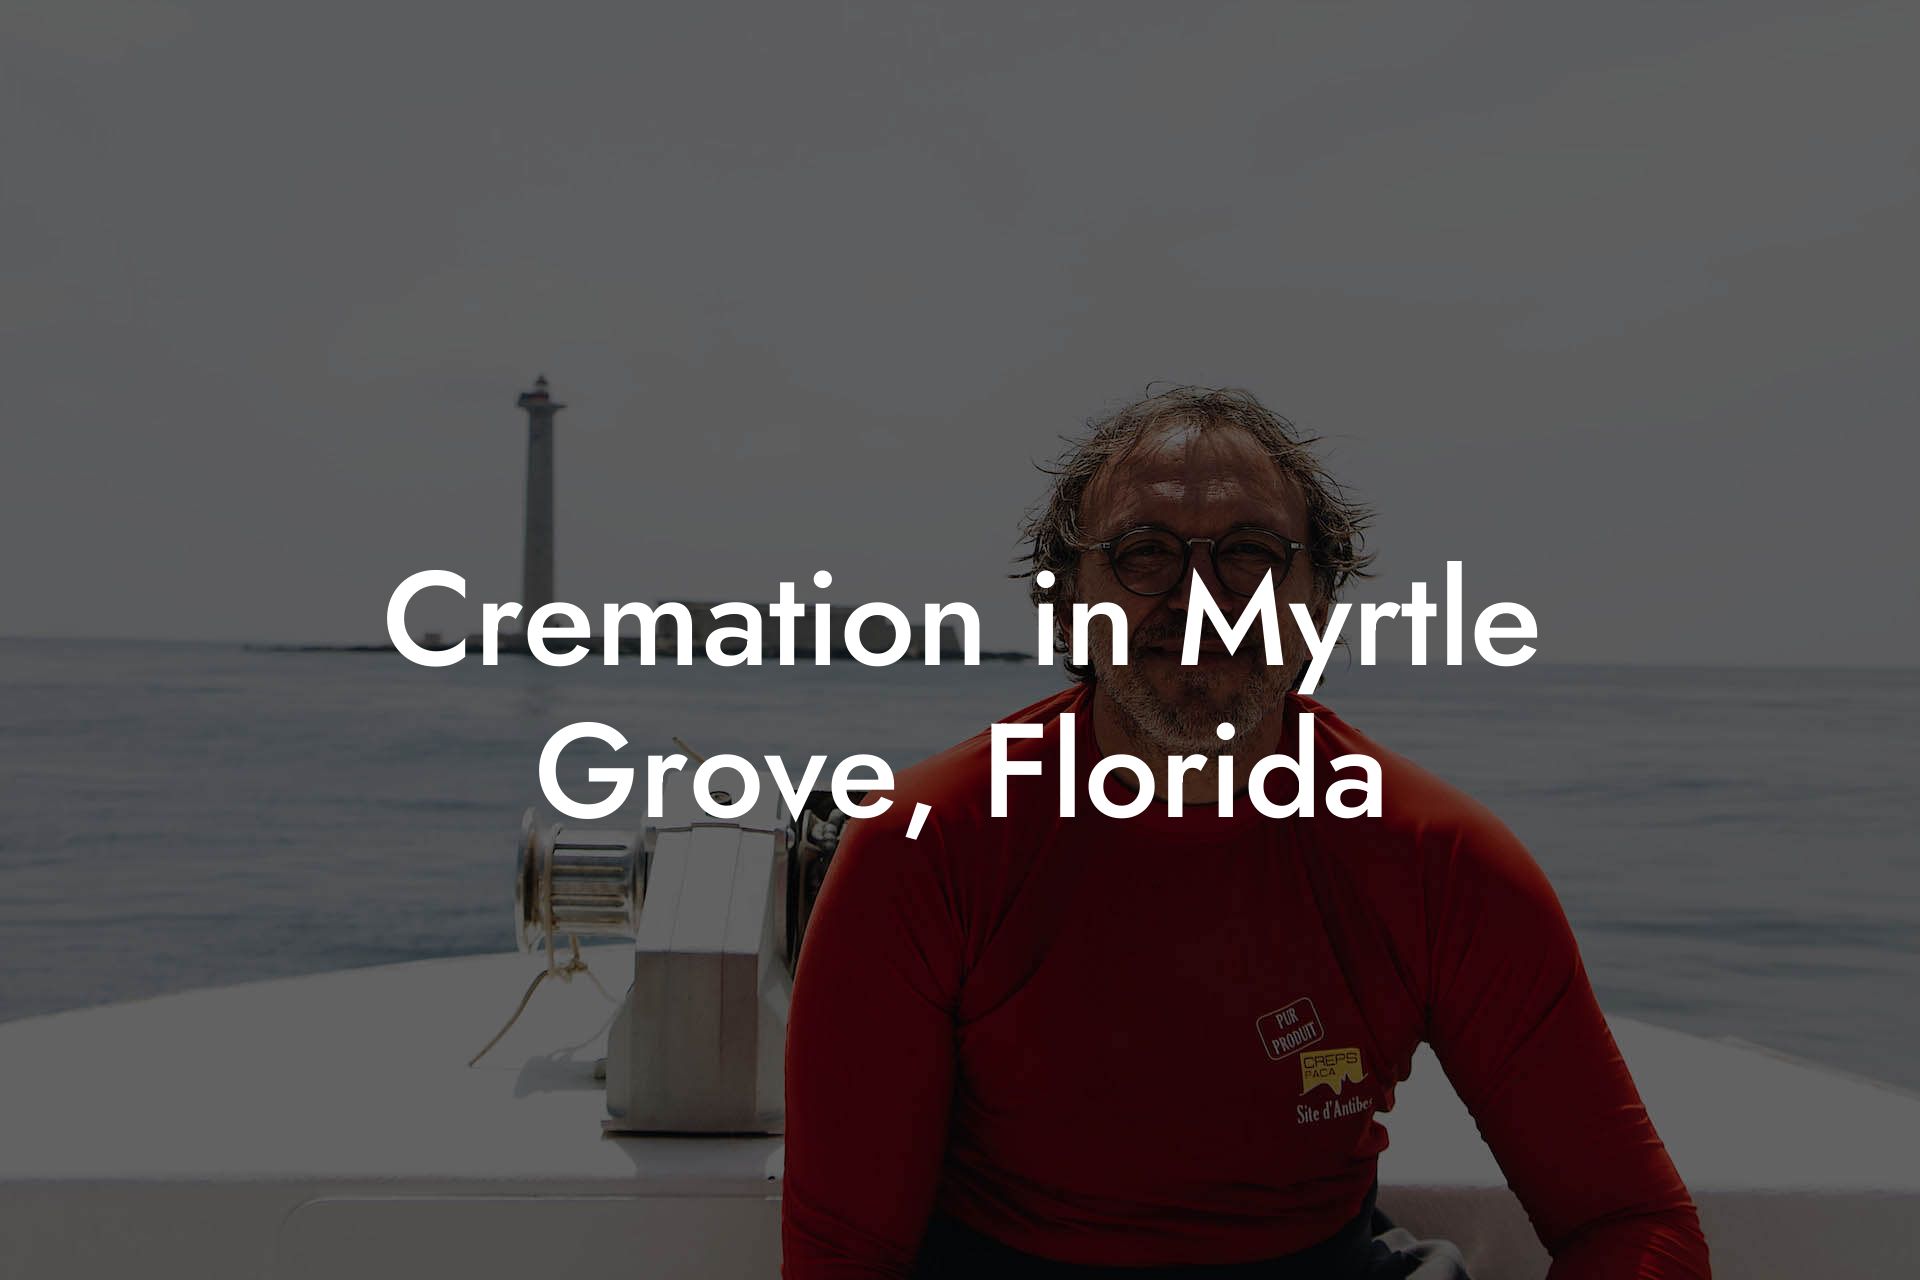 Cremation in Myrtle Grove, Florida